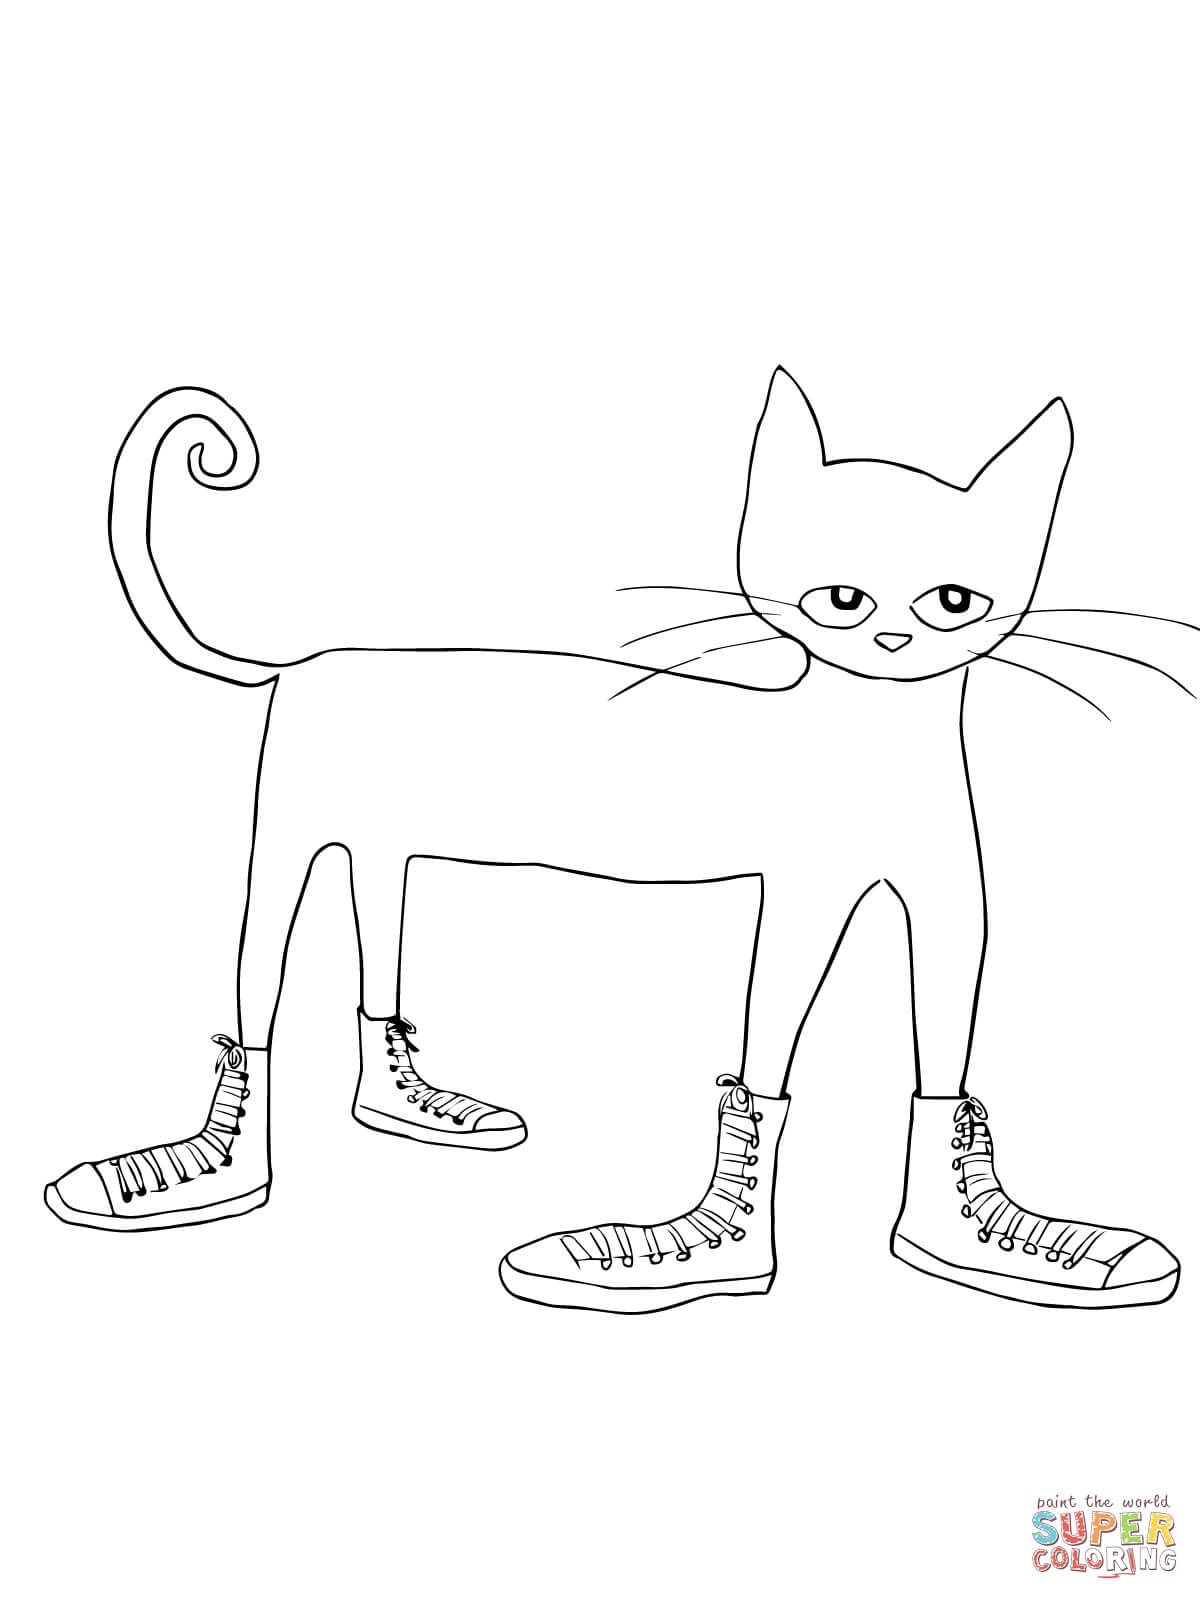 Pete the cat and. Buttons clipart sketch